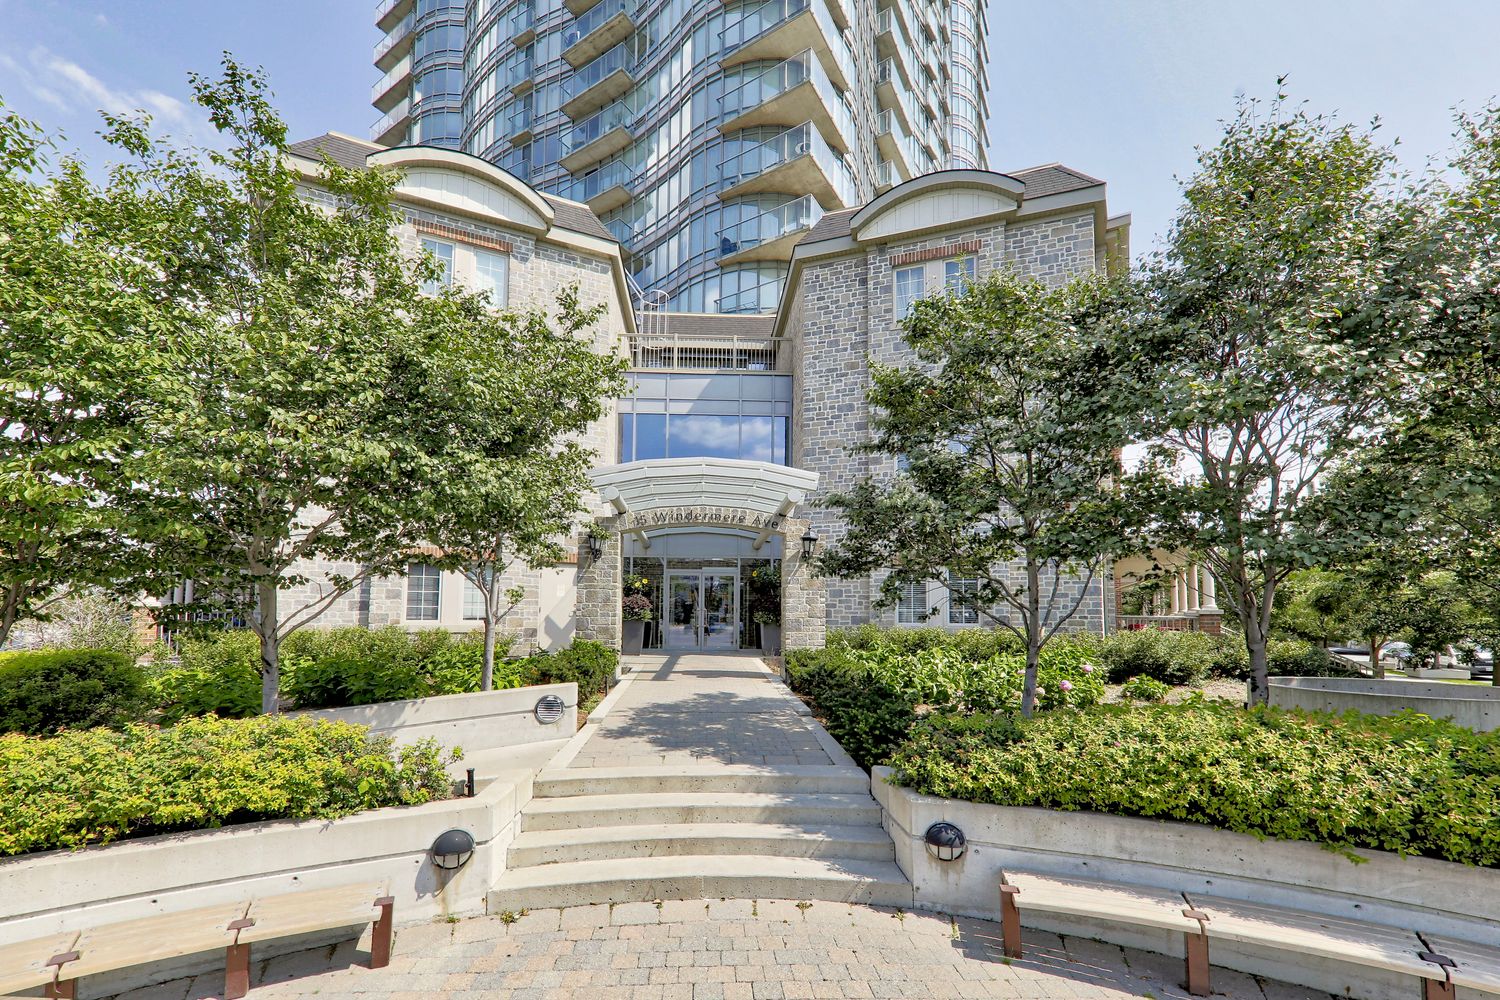 15 Windermere Avenue. Windermere By The Lake is located in  West End, Toronto - image #4 of 7